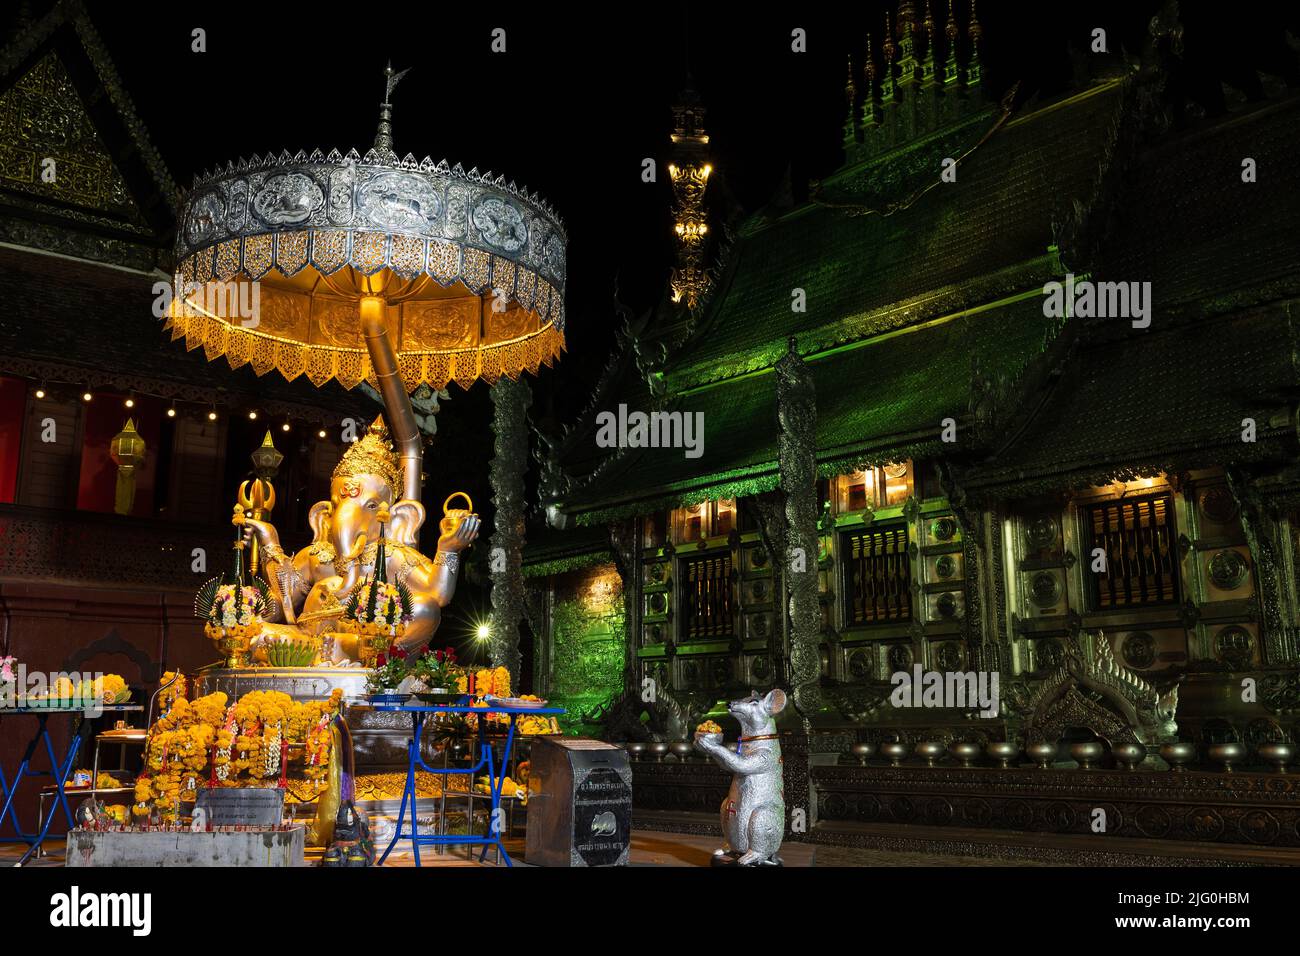 Ganesha statue and the Wat Si Suphan silver temple in Chiang Mai, Thailand Stock Photo